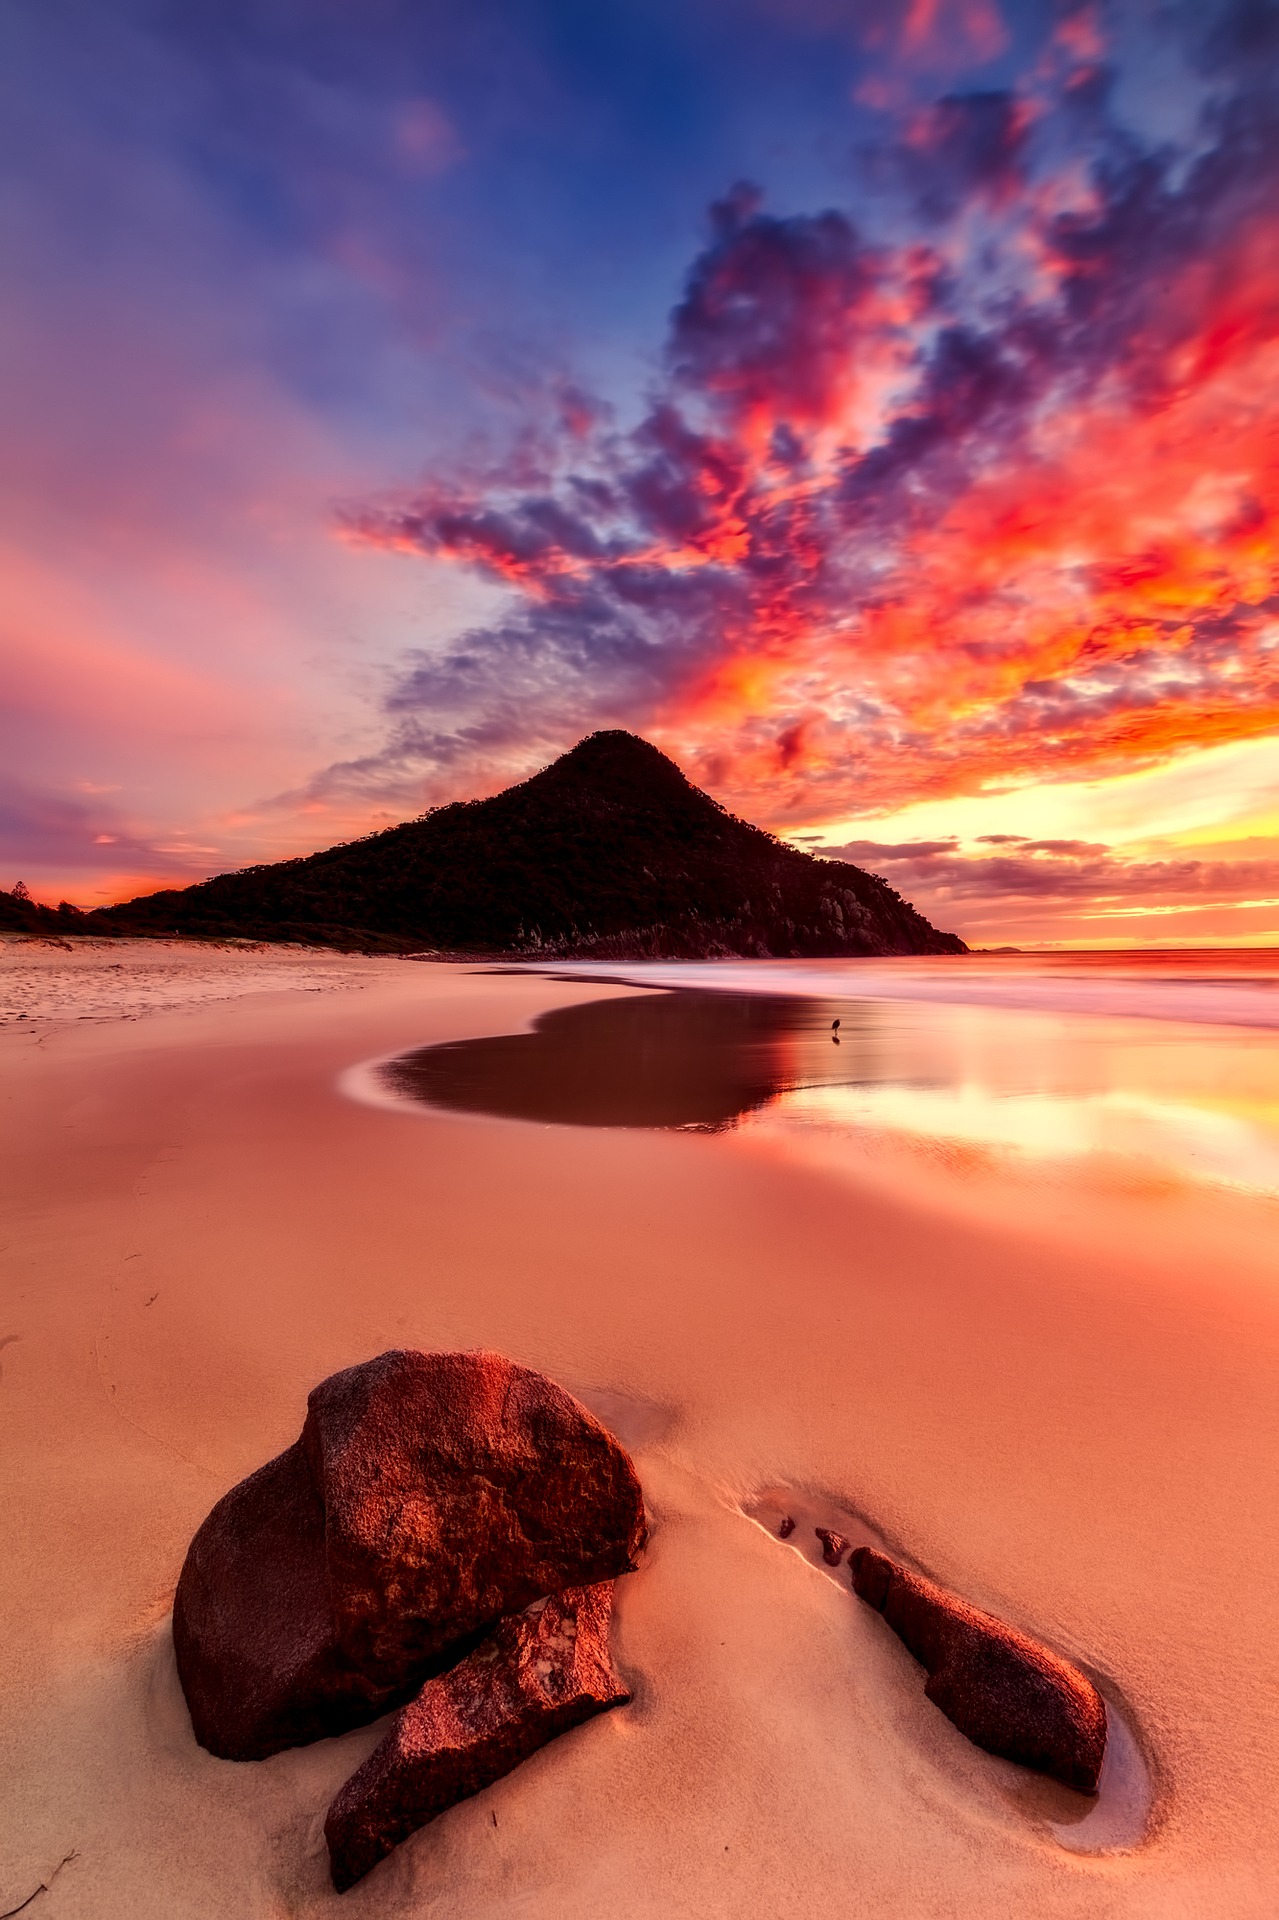 Sunset on an Australian beach with a mountain in the distance